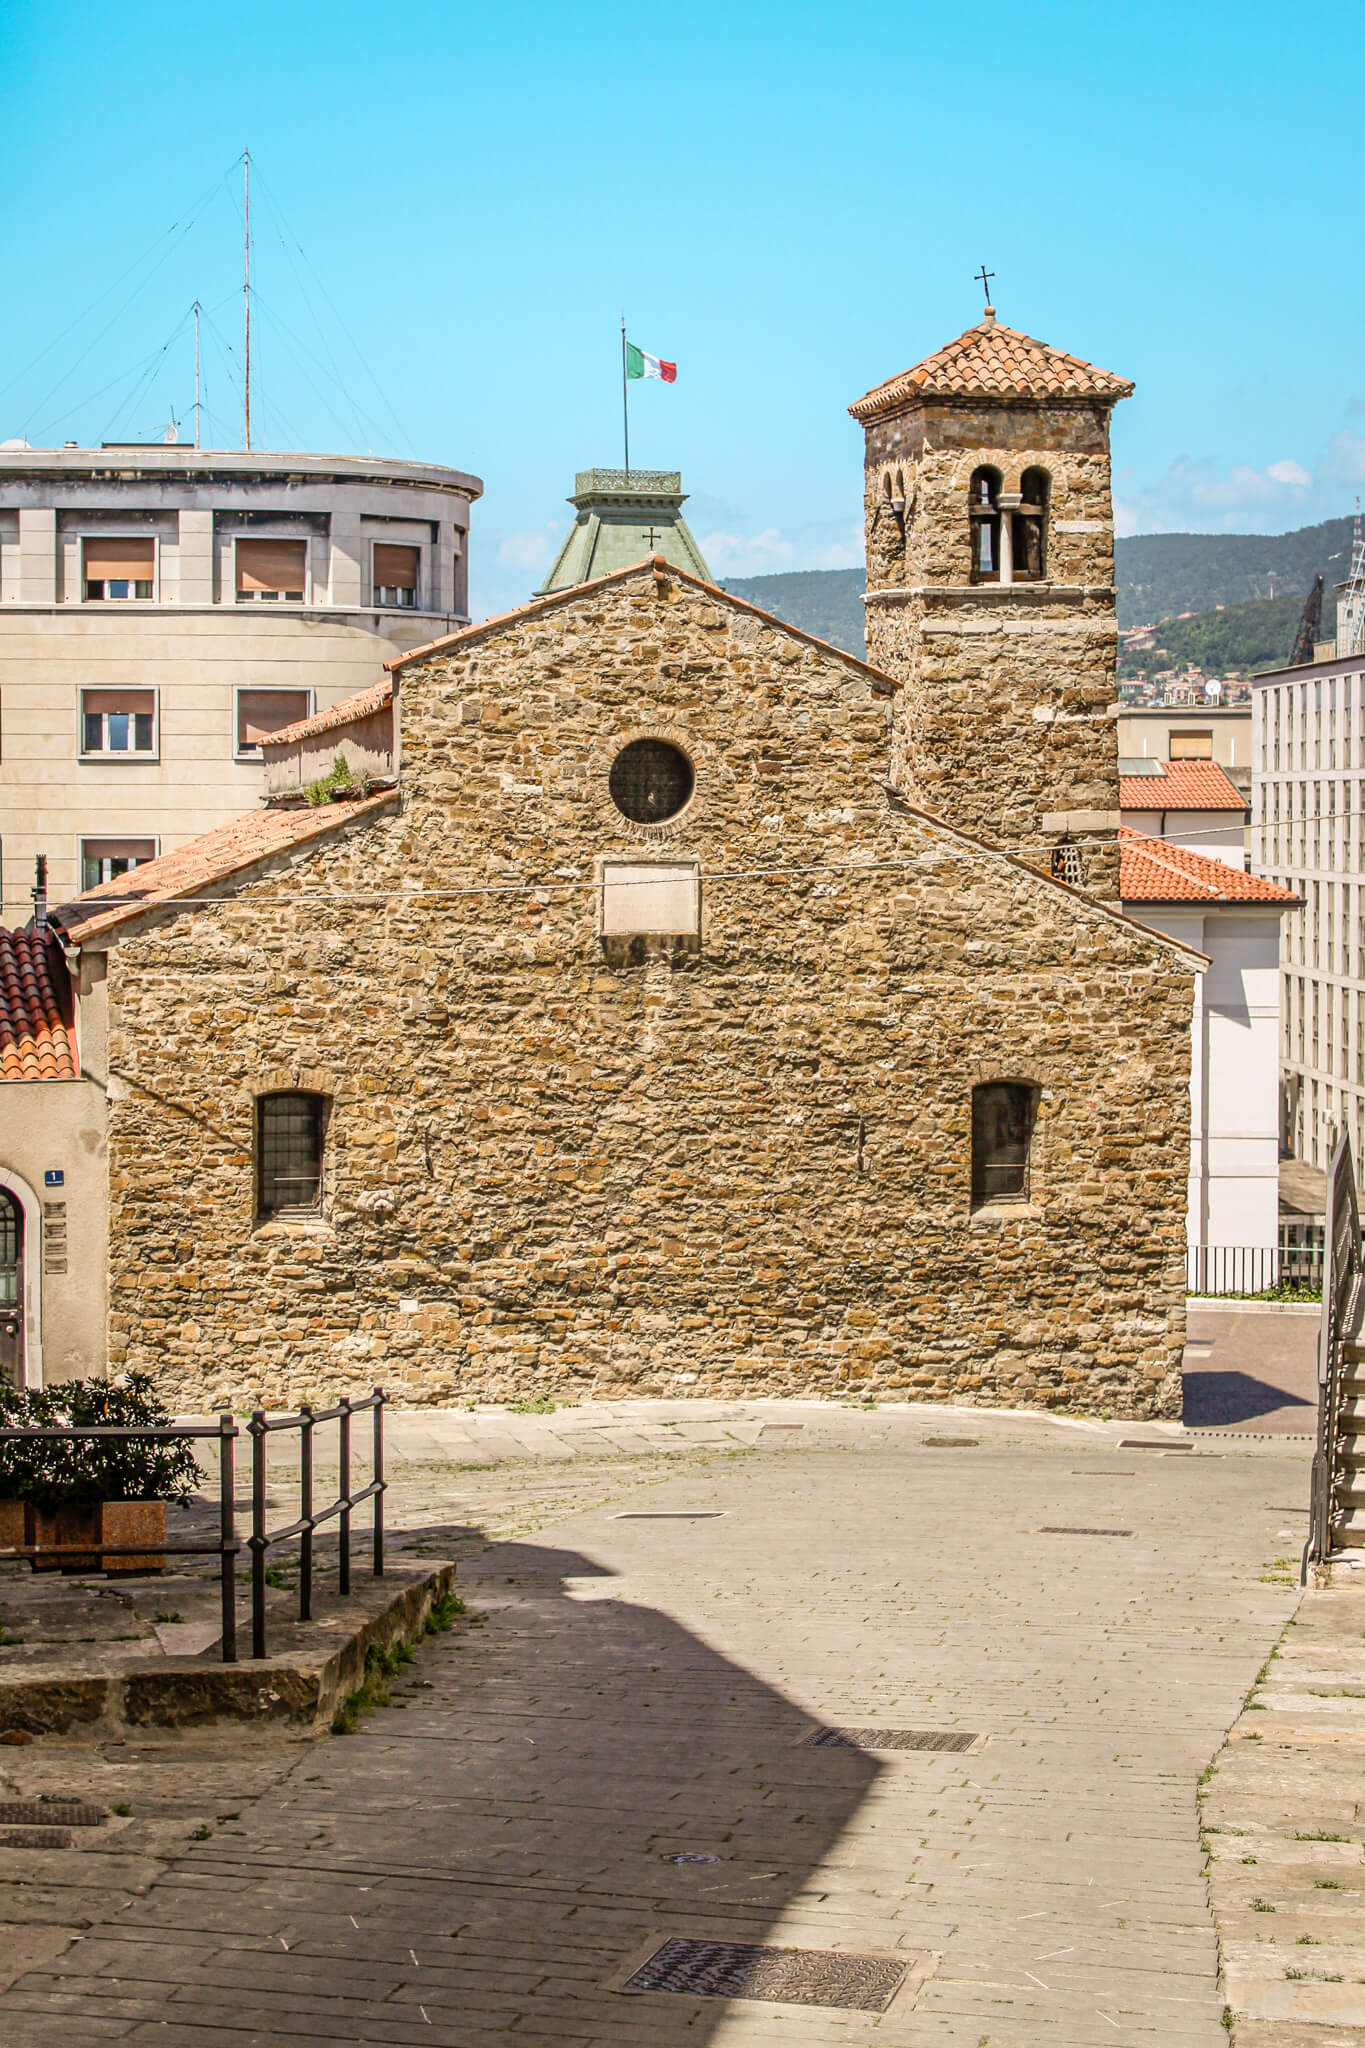 Basilica of San Silvestro, the oldest church building in Trieste